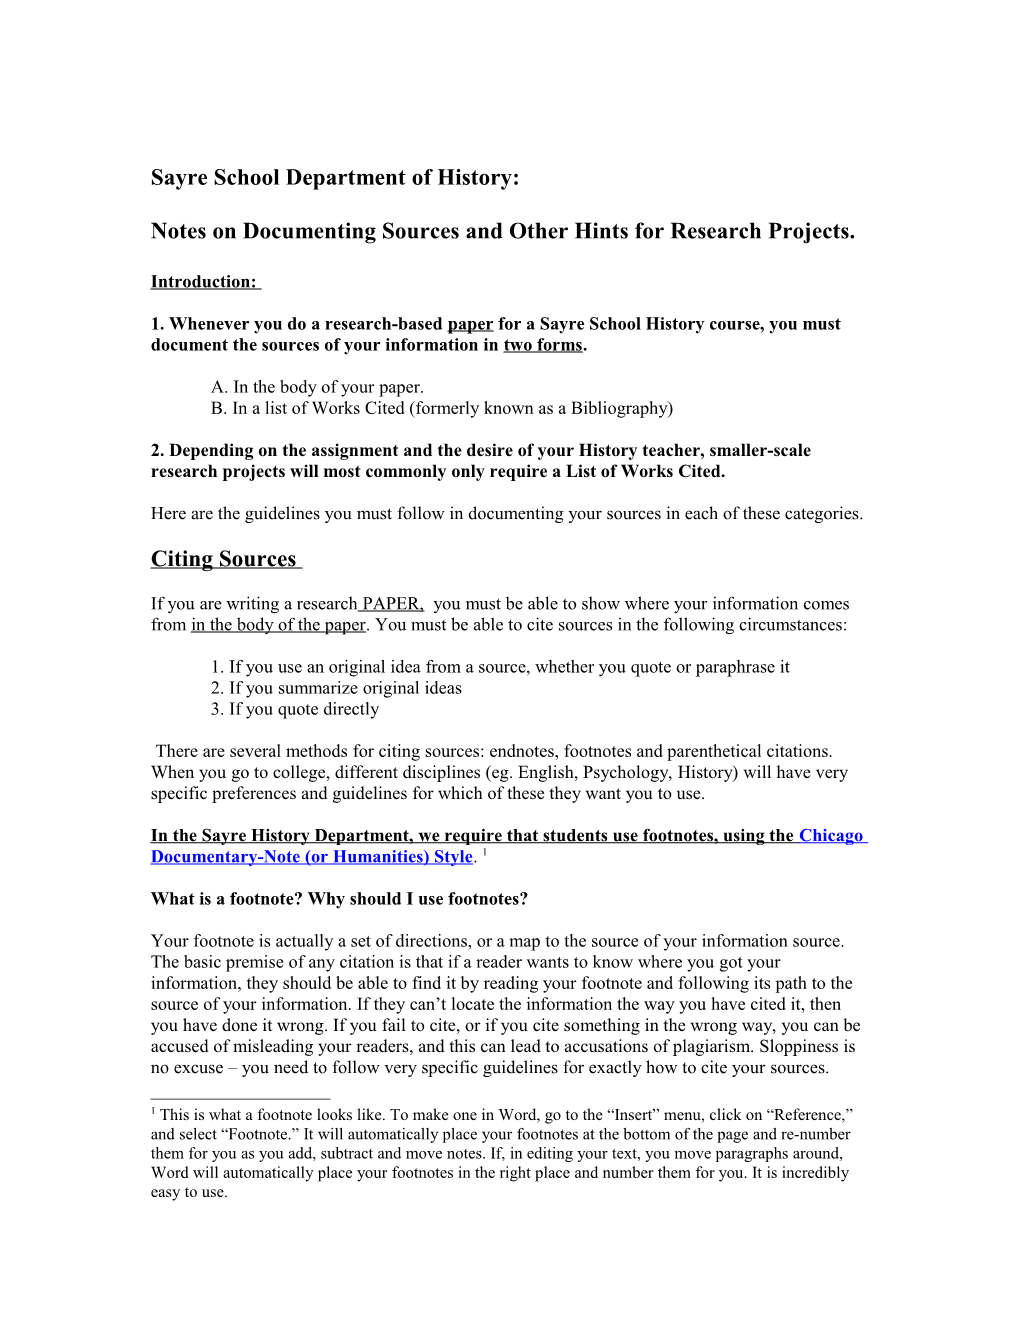 Sayre School Department of History: Notes on Documenting Sources and Other Hints for Research